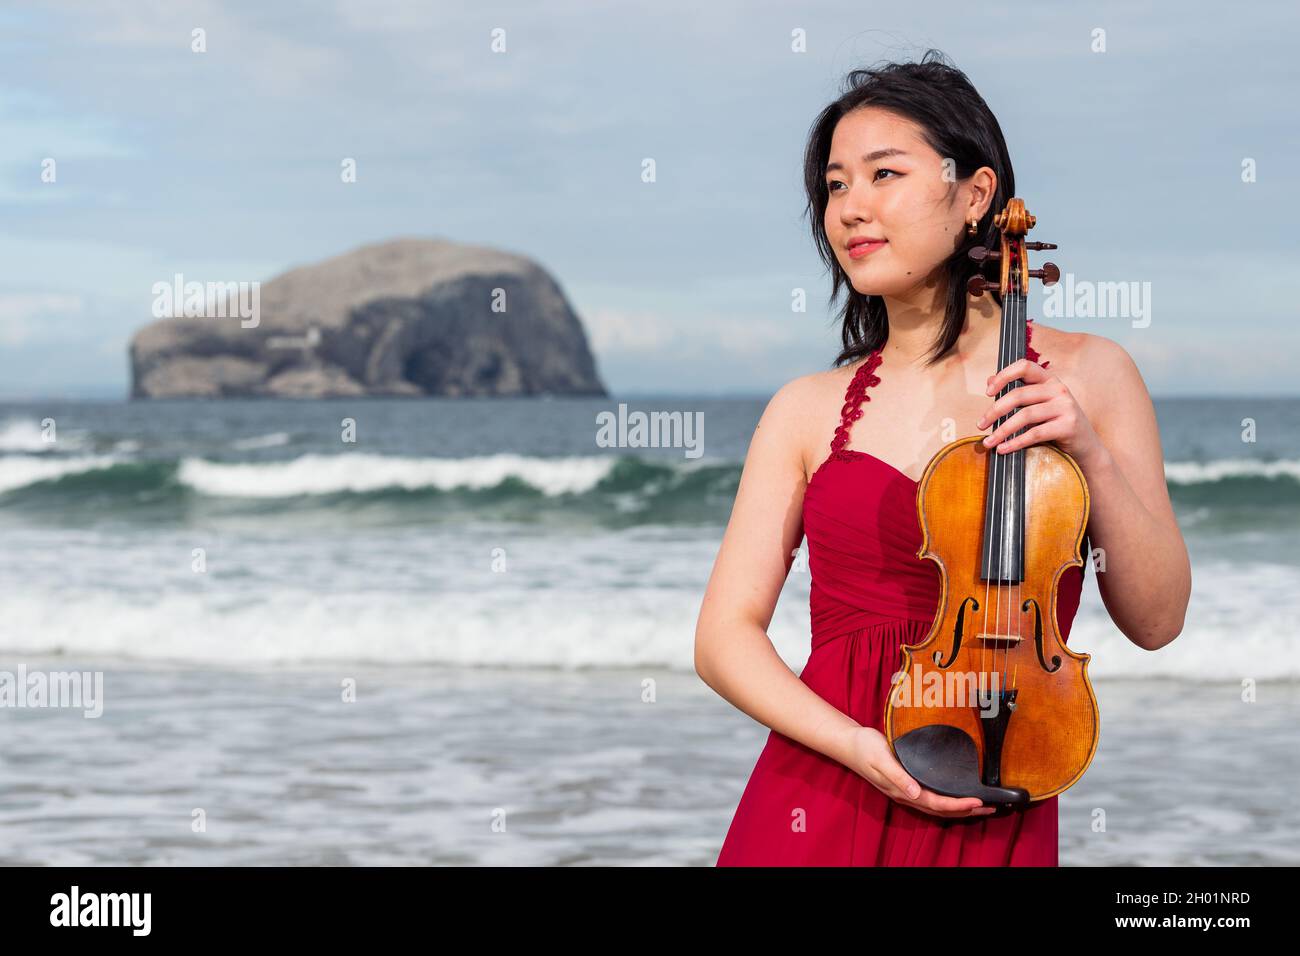 **Pics free to use**  The extraordinarily talented young violinist Coco Tomita was joined by Simon Callaghan in recital this weekend at the Lammermuir Stock Photo